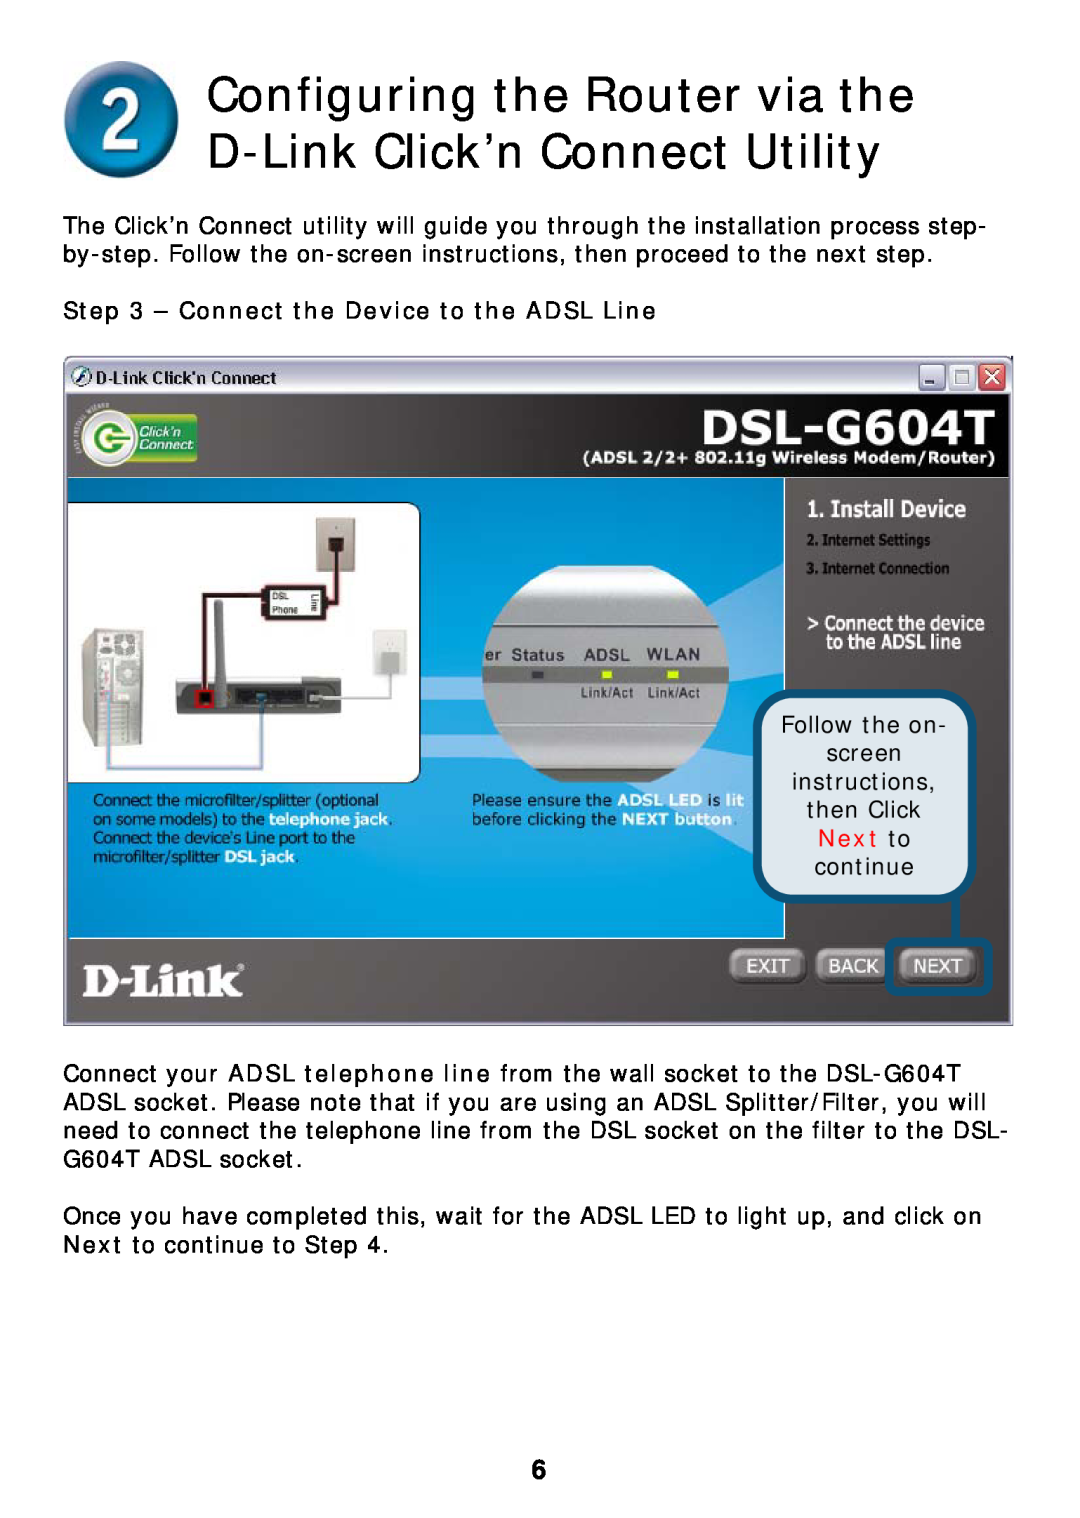 D-Link DSL-G604T Configuring the Router via the D-Link Click’n Connect Utility, Connect the Device to the ADSL Line 